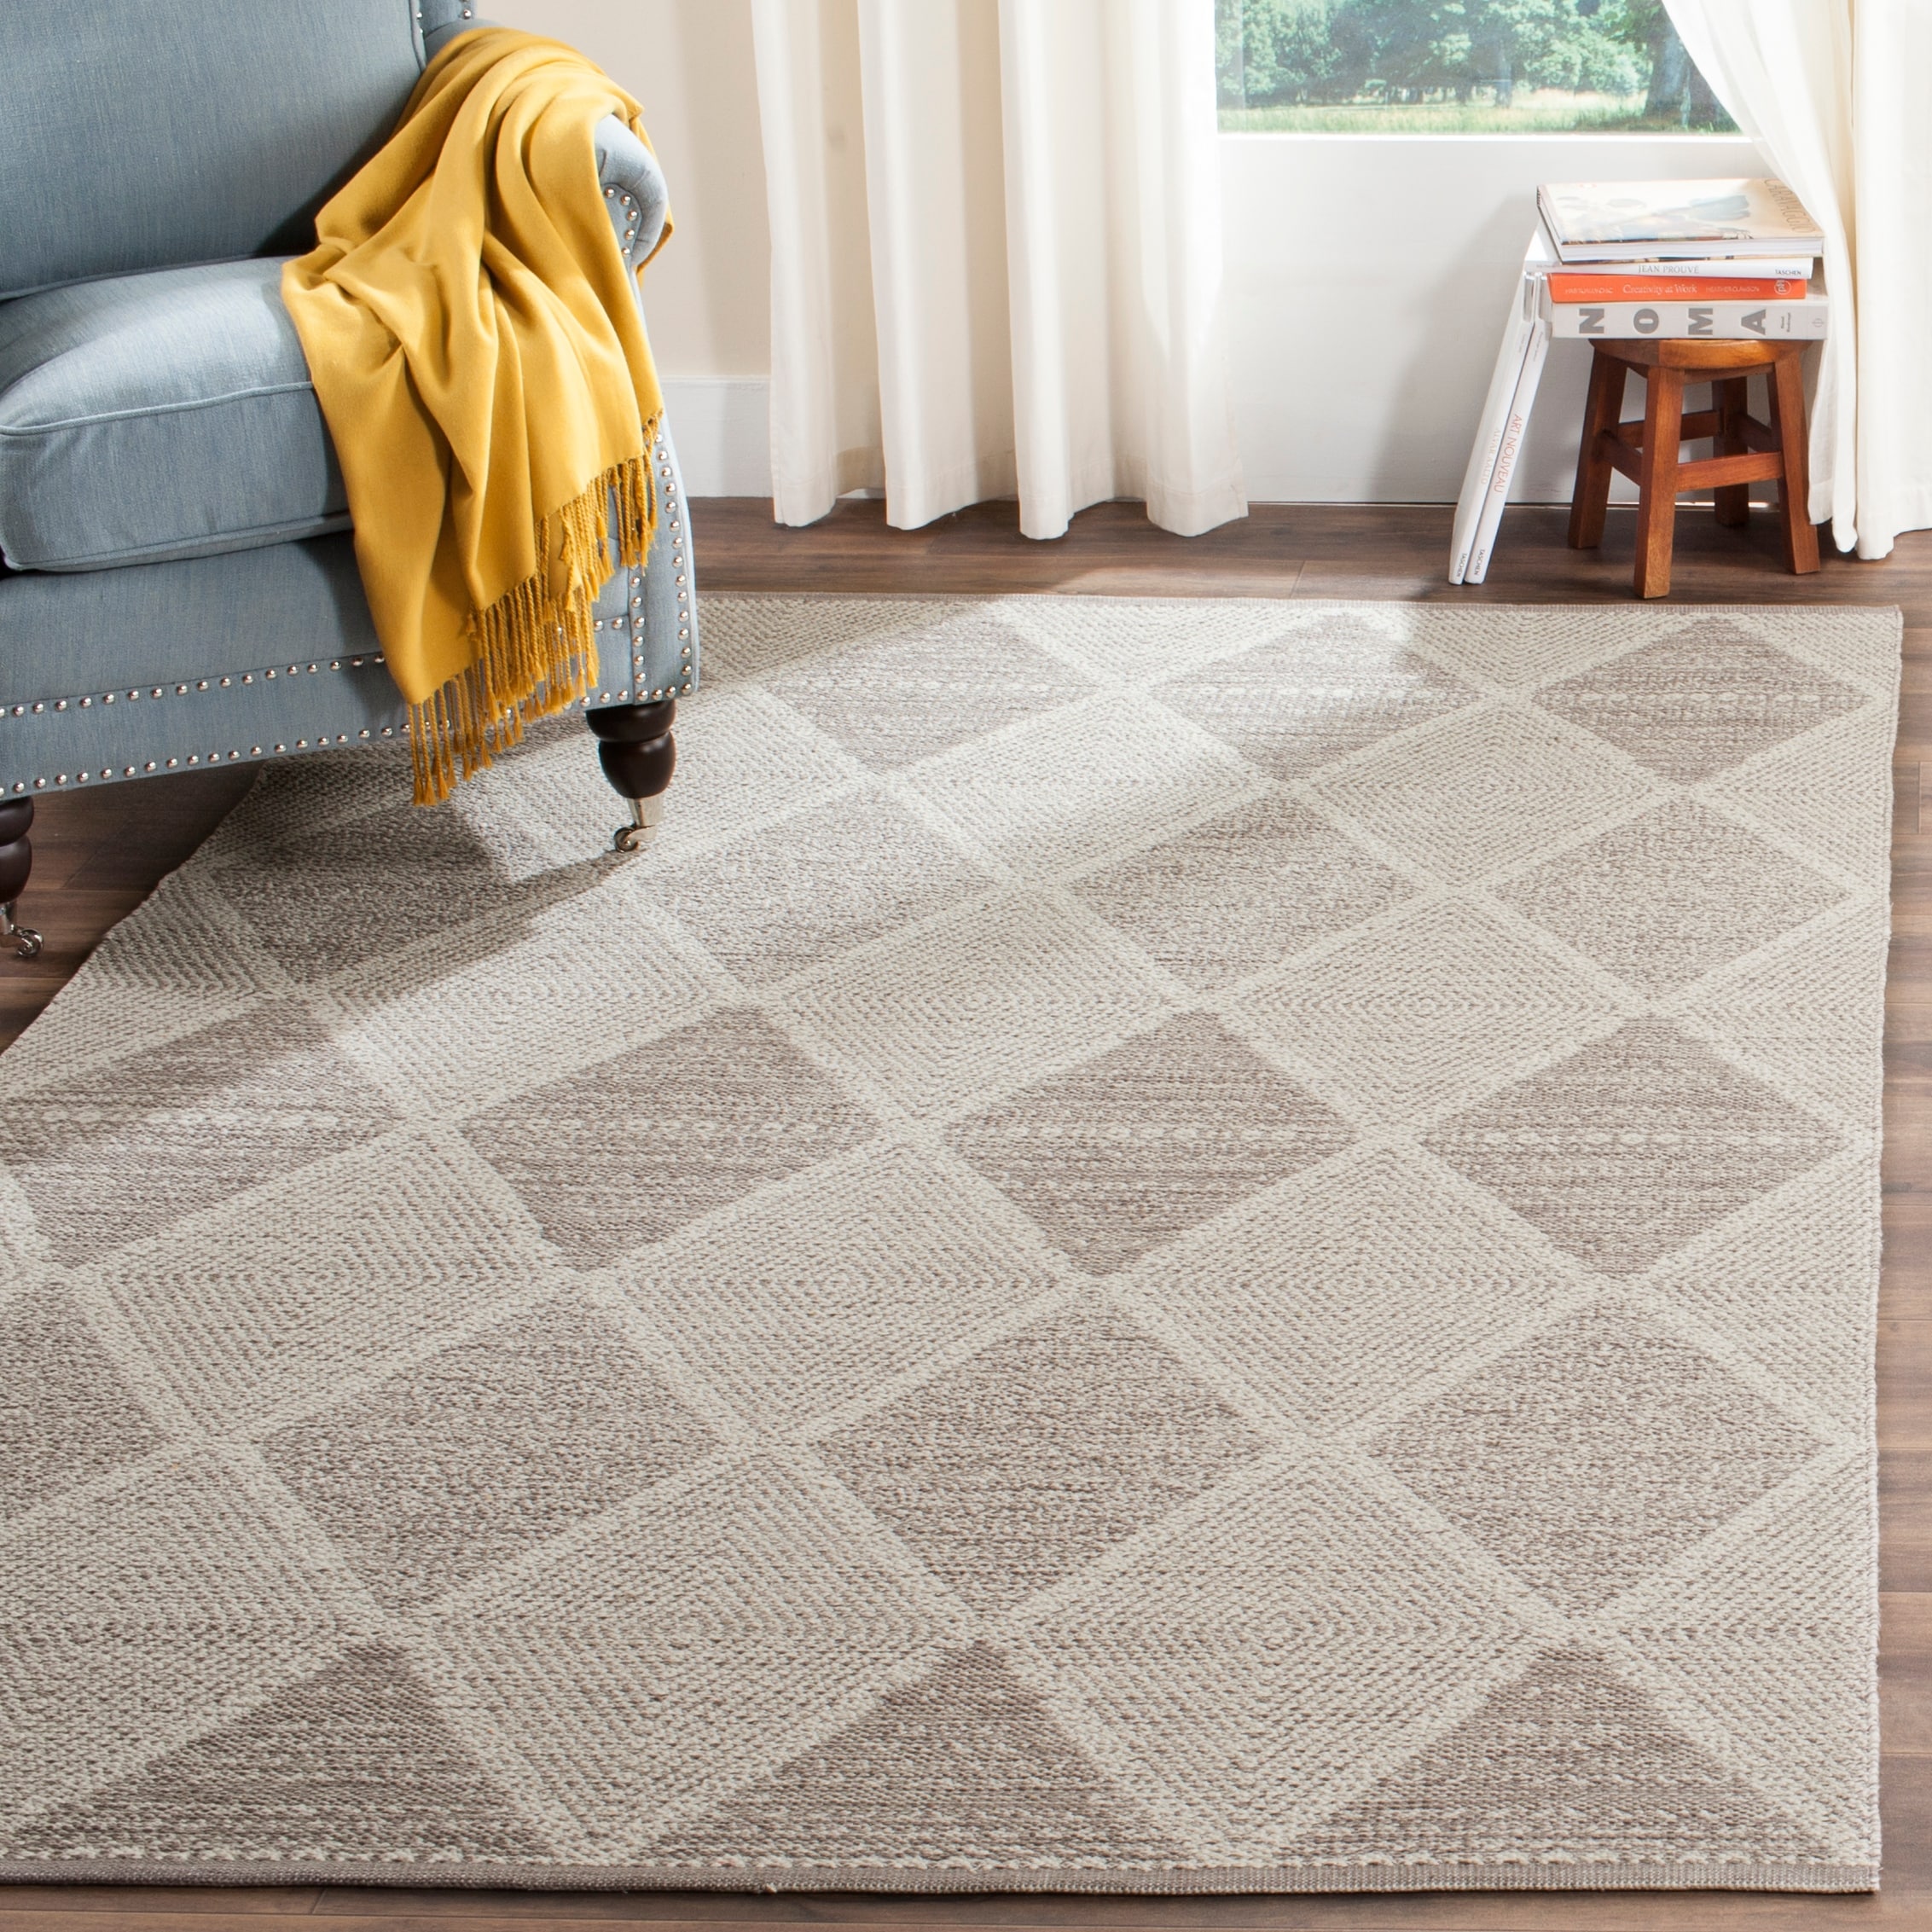 Transitional Beige Flatweave Rug Small Large Cotton Living Room Hall Runner Rugs 